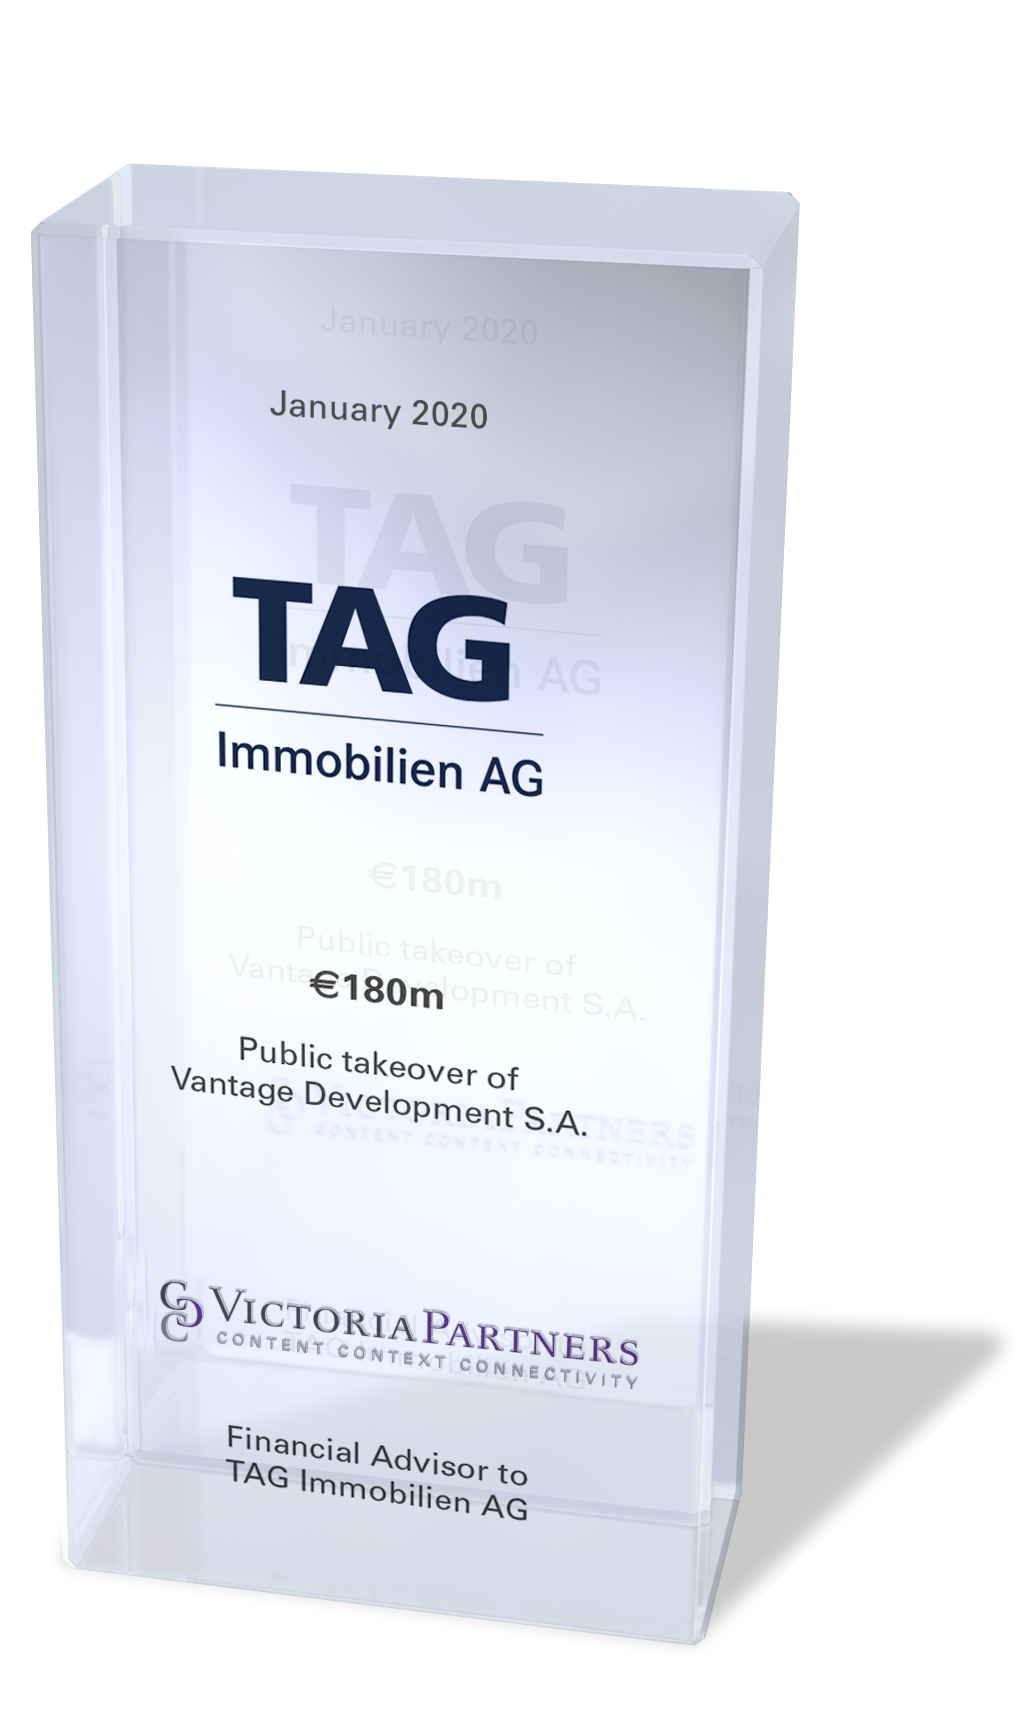 VICTORIAPARTNERS - Financial Advisor to TAG Immobilien AG - January 2020